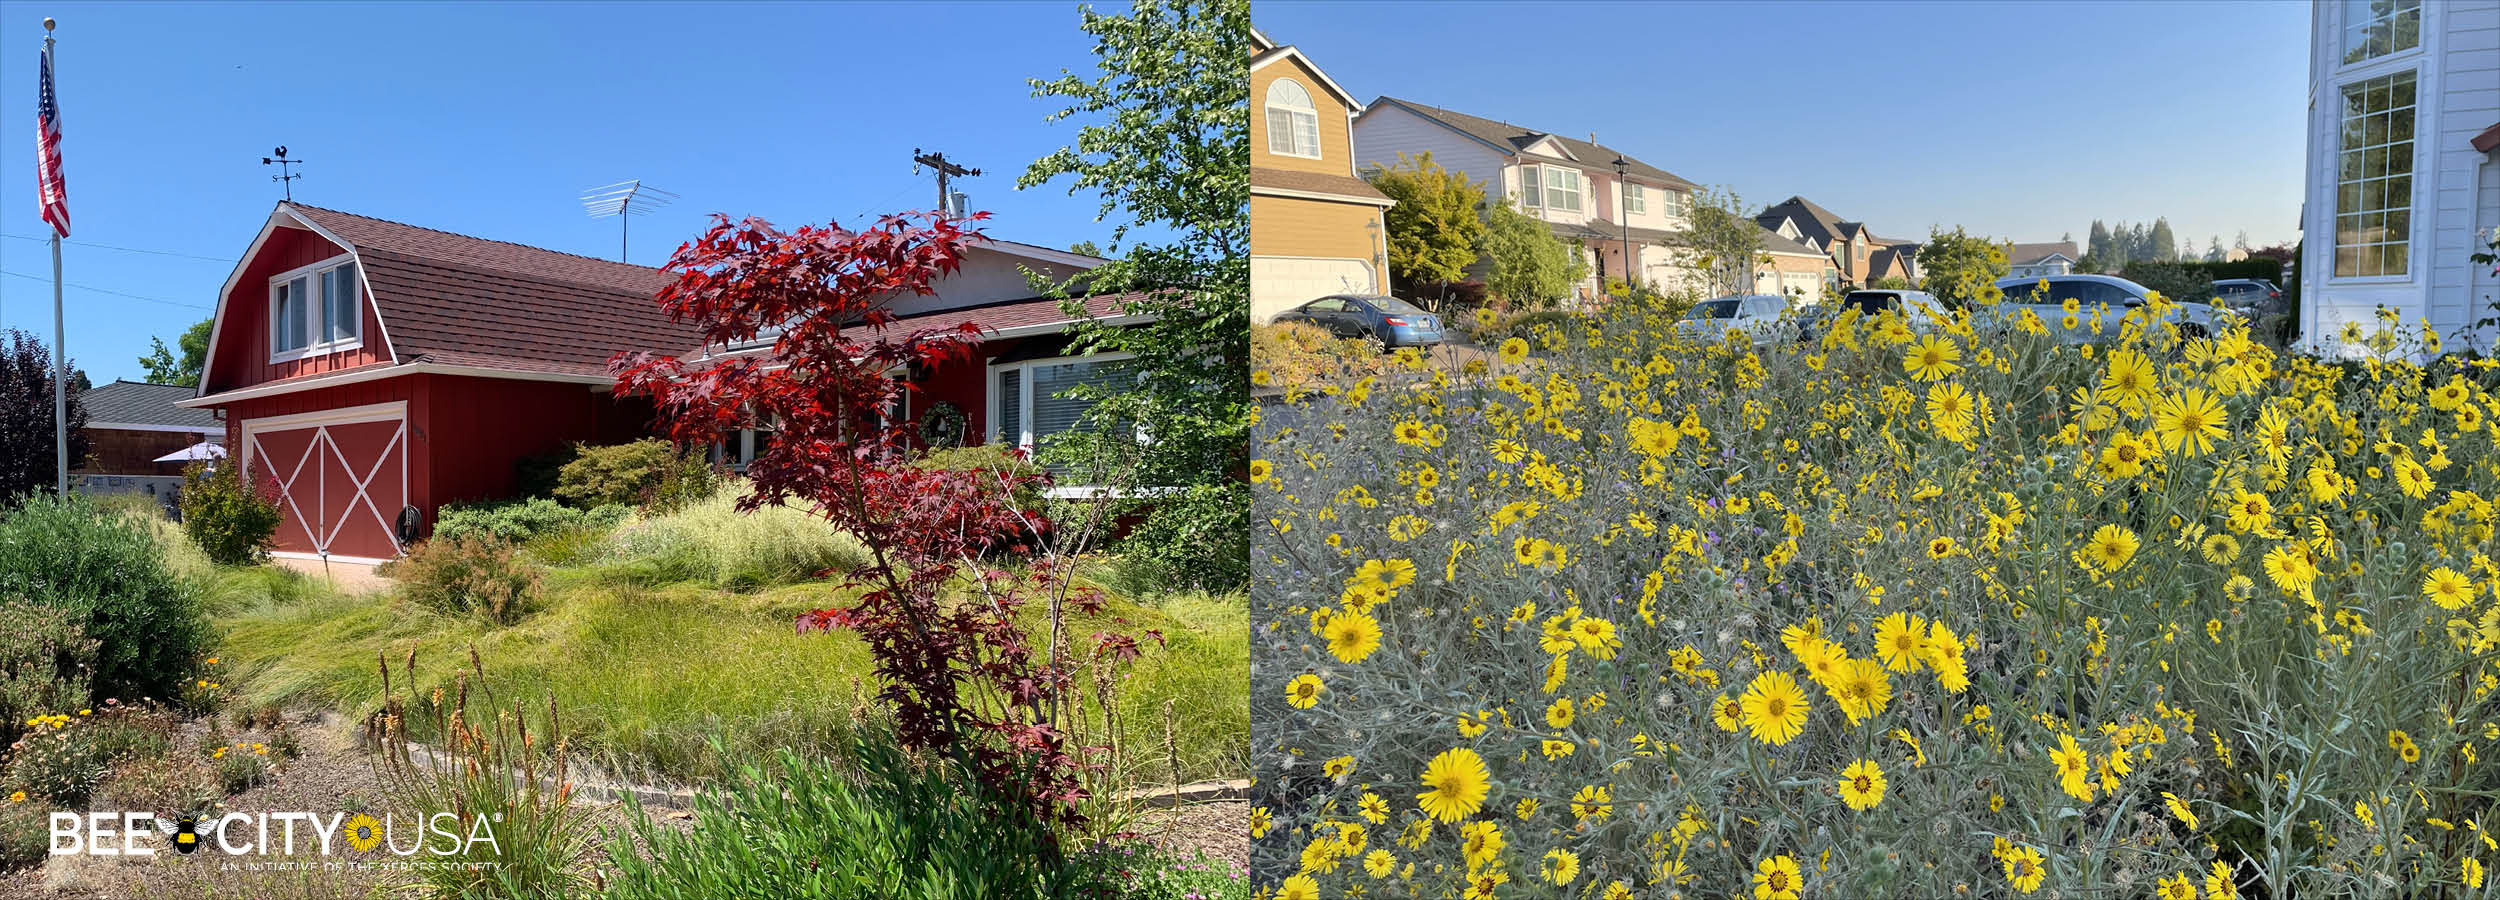 Two photos of yards on sunny days with houses in the background, yards have tall plants, rather than conventional lawns.